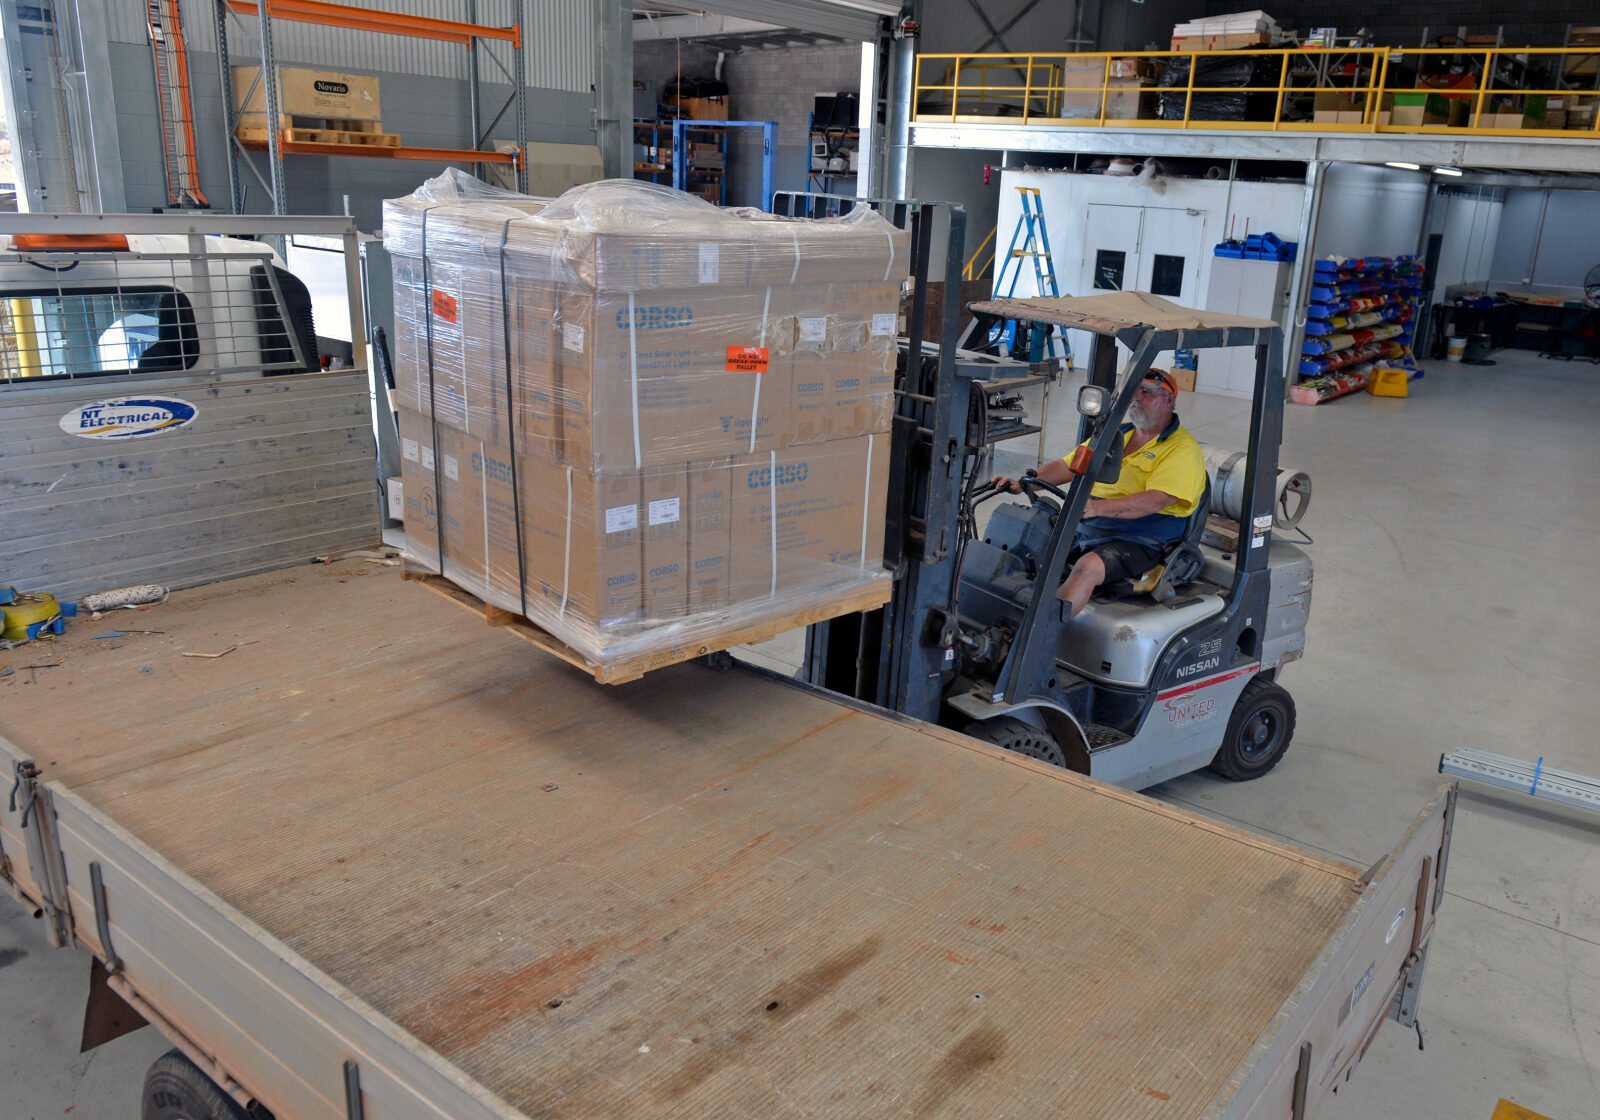 Interior facility with forklift loading electrical components onto flatbed truck.